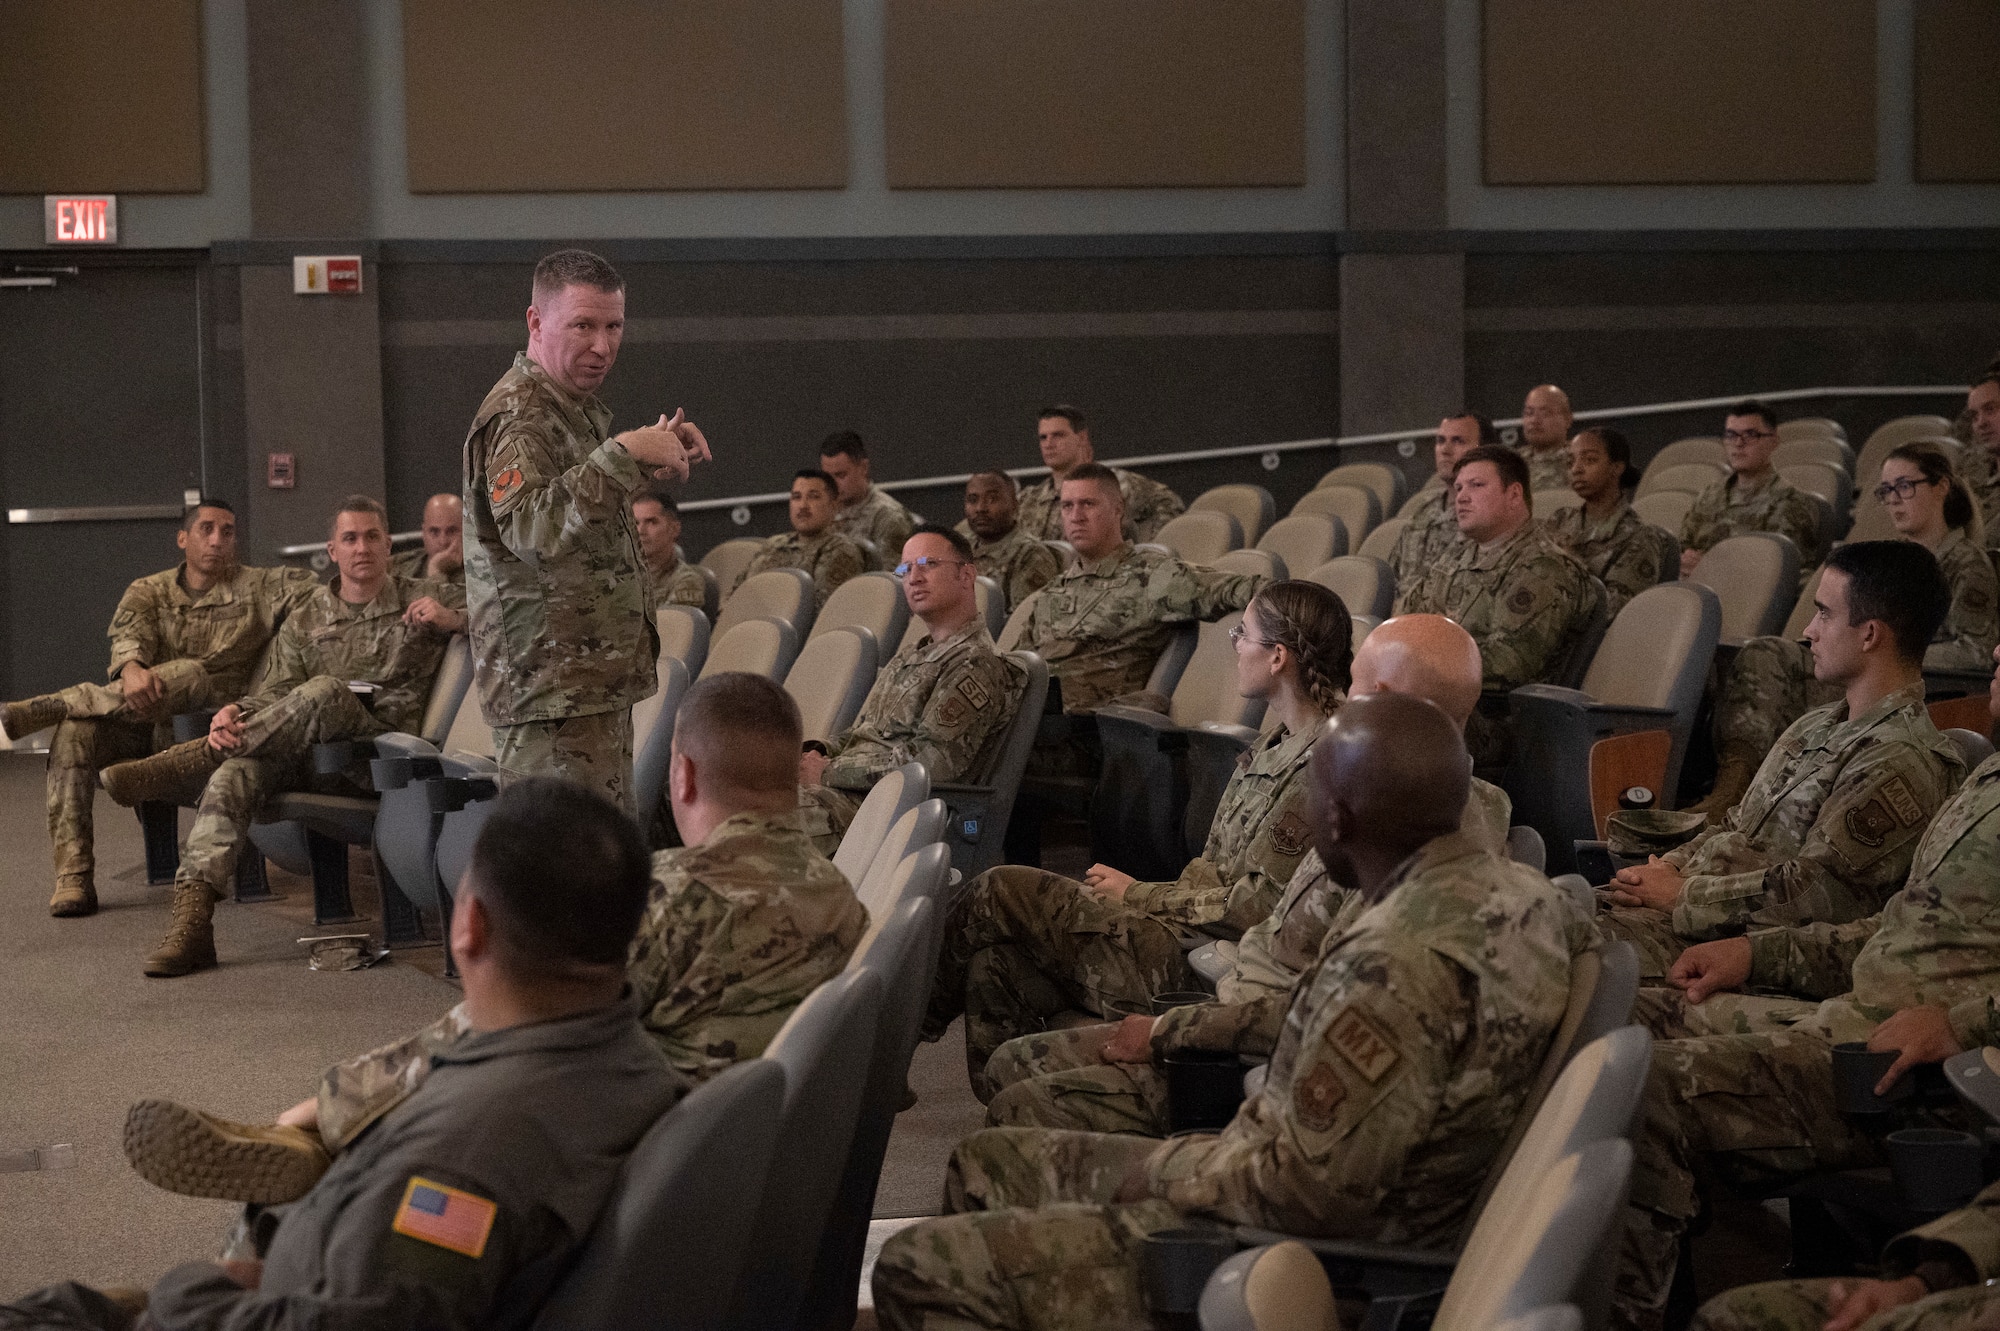 Chief Master Sgt. Chad Bickley, 18th Air Force command team, speaks to Airmen during a 317th Airlift Wing Mission Brief during his visit to Dyess Air Force Base, Texas, Aug. 25, 2022. During the Mission Brief, CMSgt. Bickley spoke on being prepared for modern era-conflict and imminent threats. (U.S. Air Force photo by Senior Airman Josiah Brown)